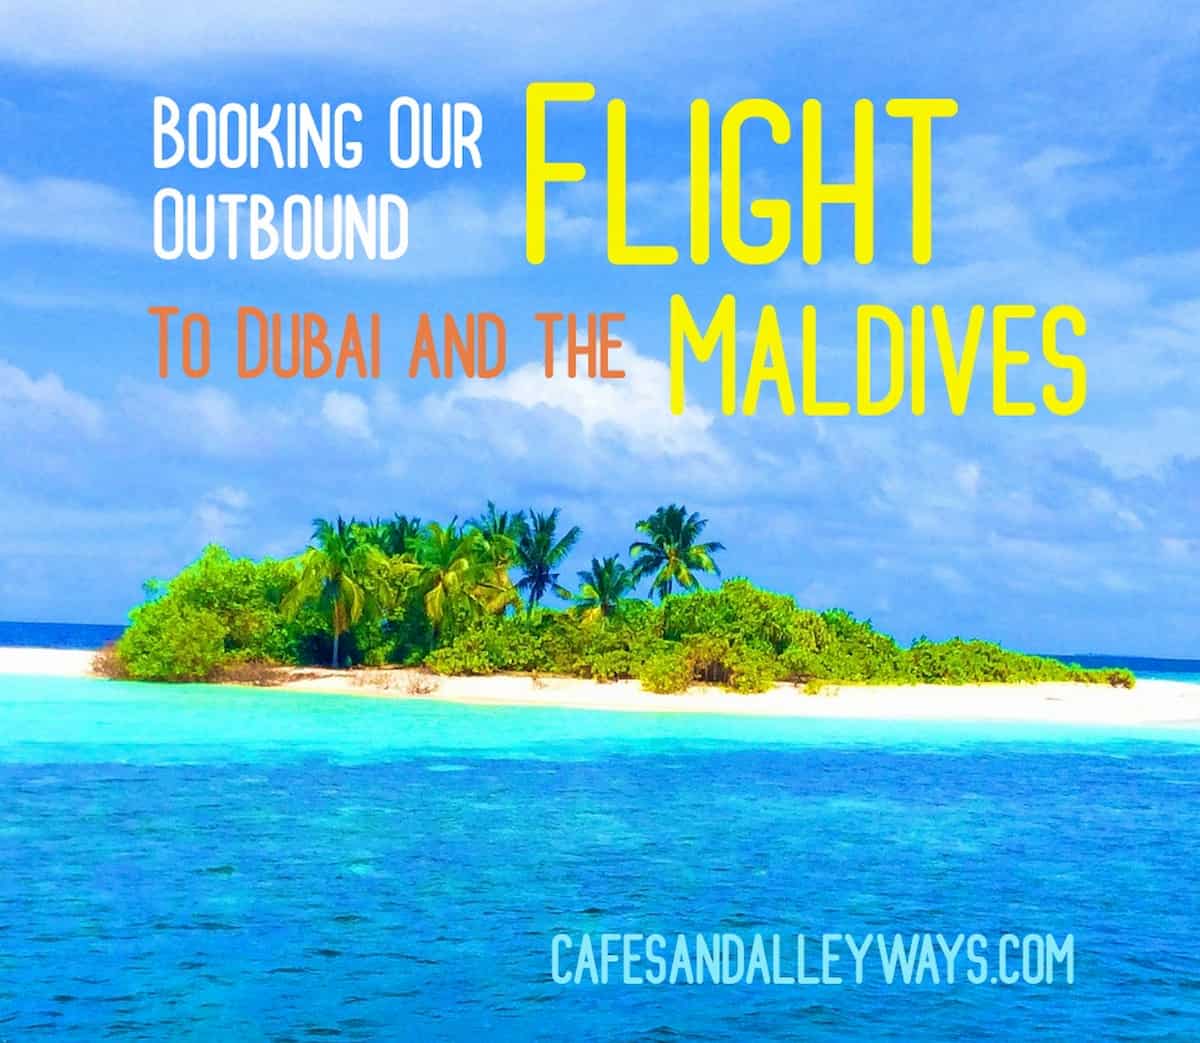 You are currently viewing Booking Our Outbound Flight to Dubai and The Maldives